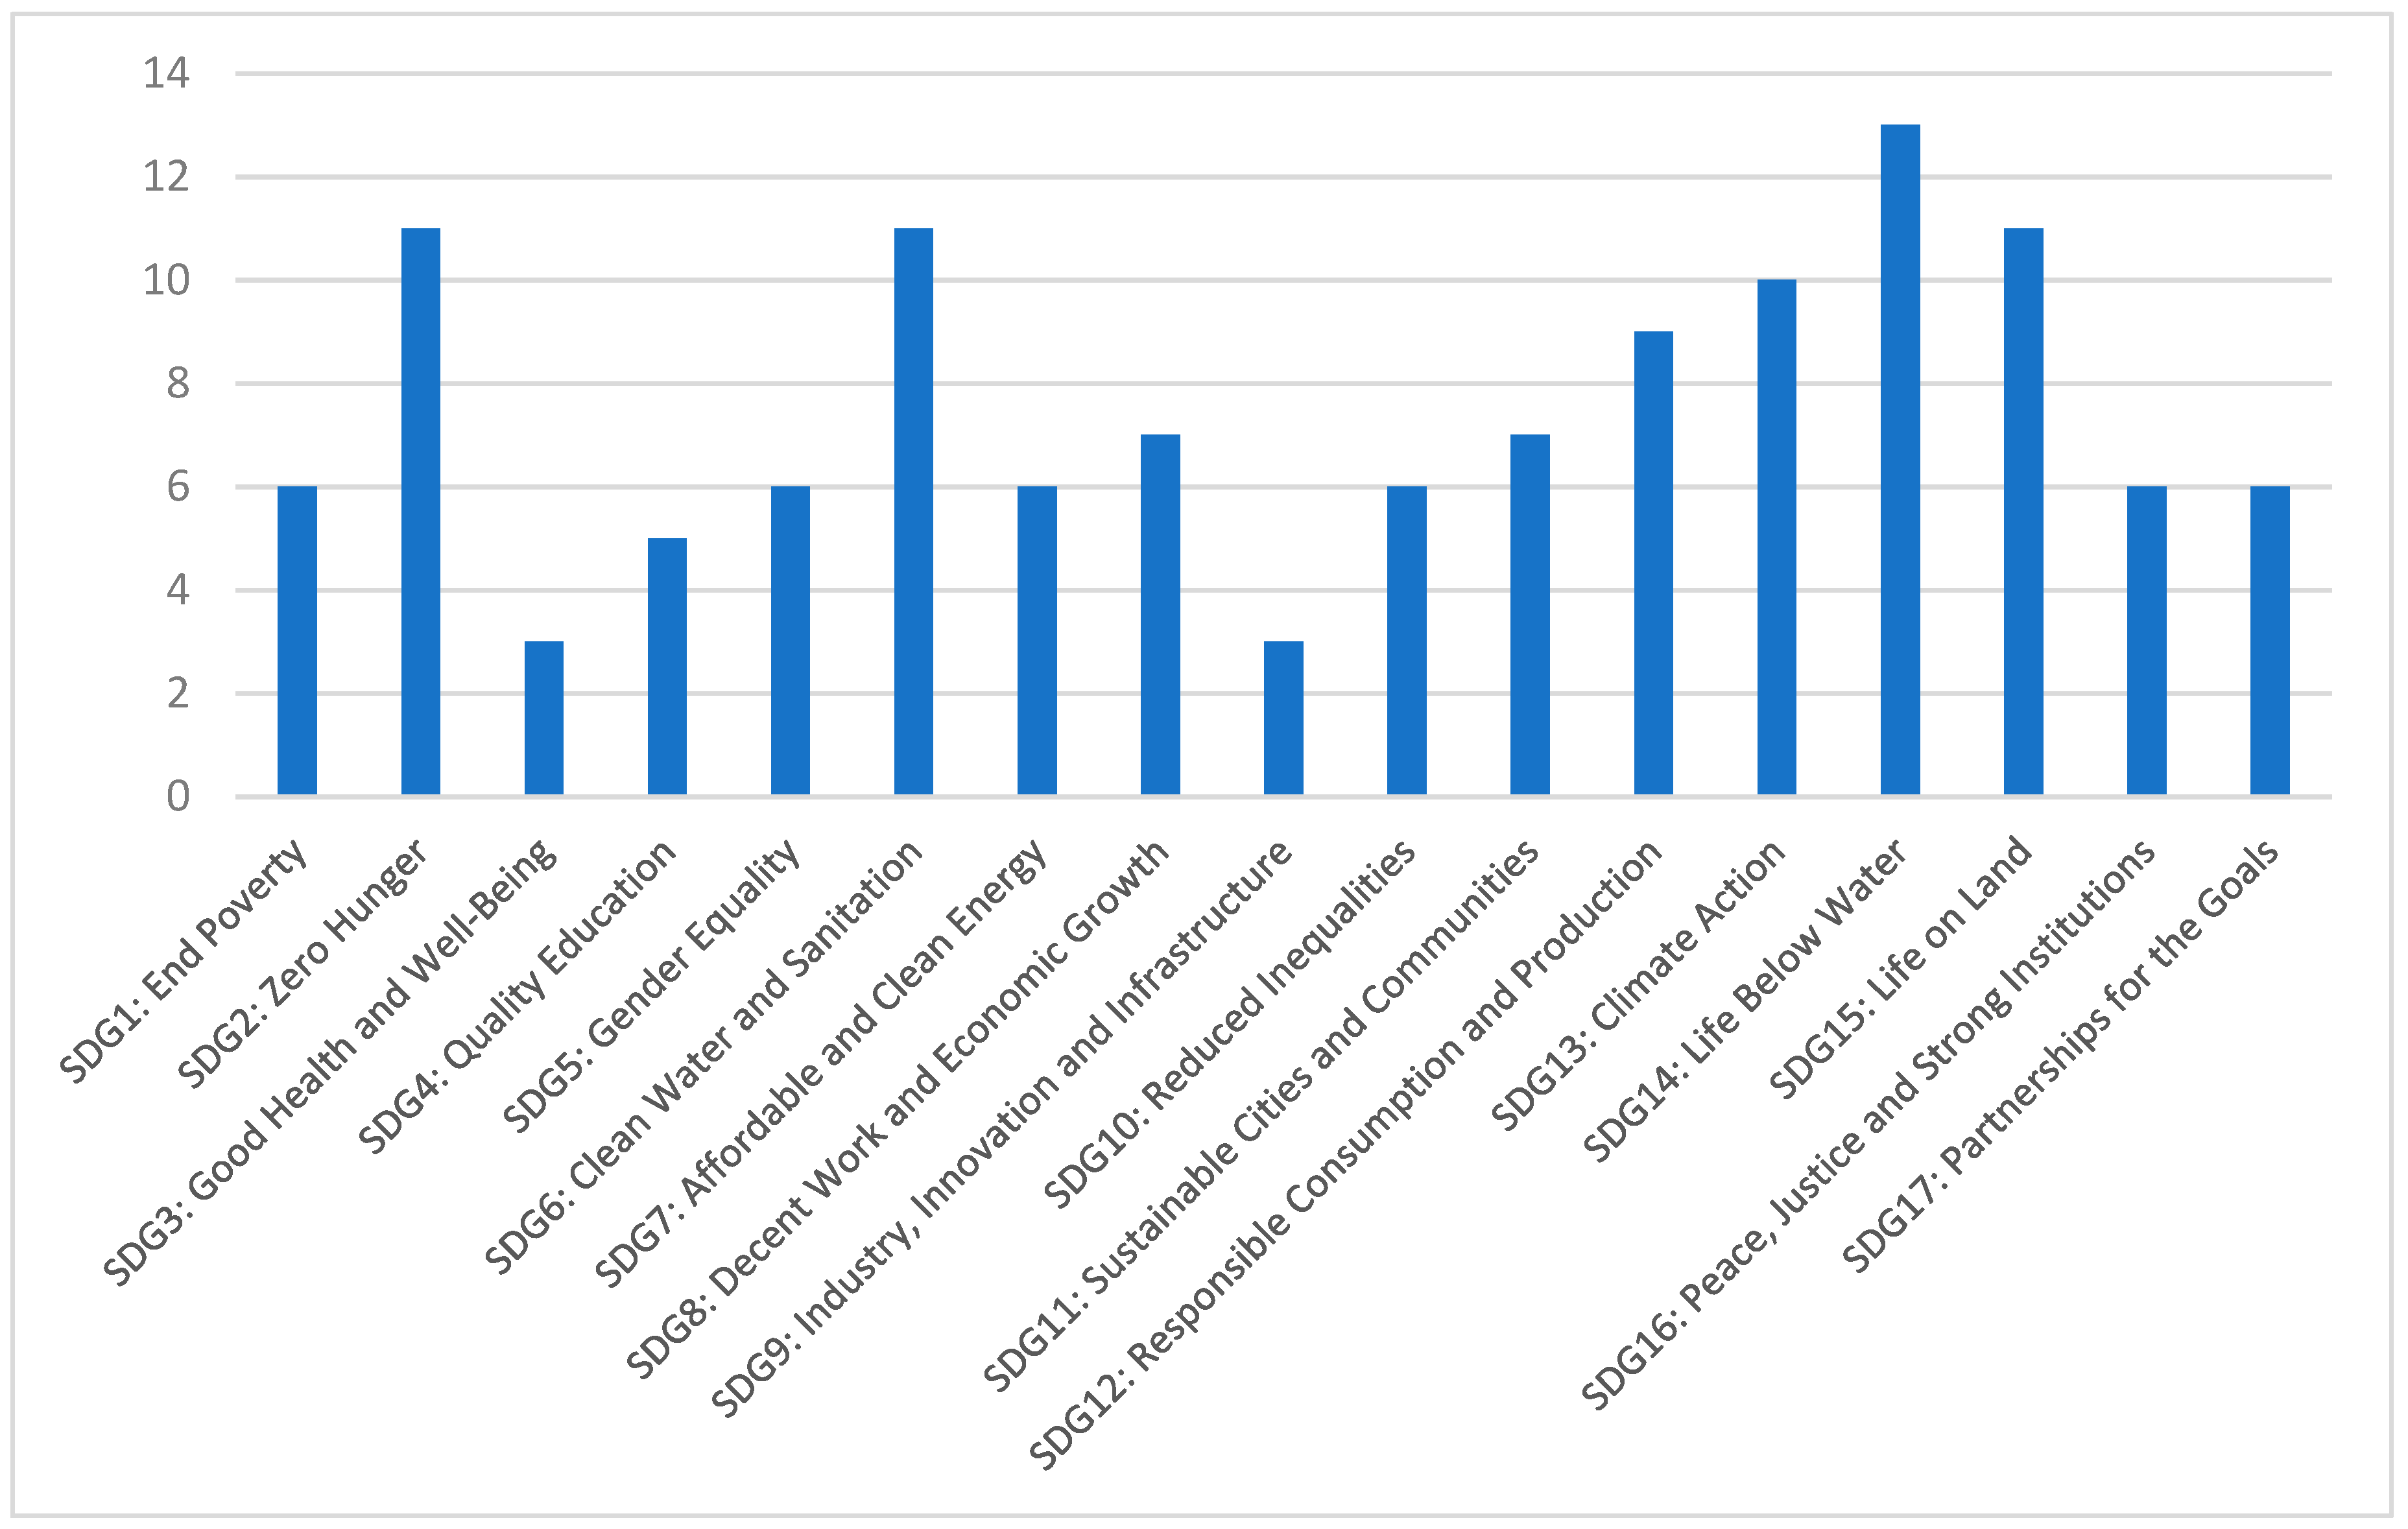 Comparison of average individual SDG scores for different city groups a